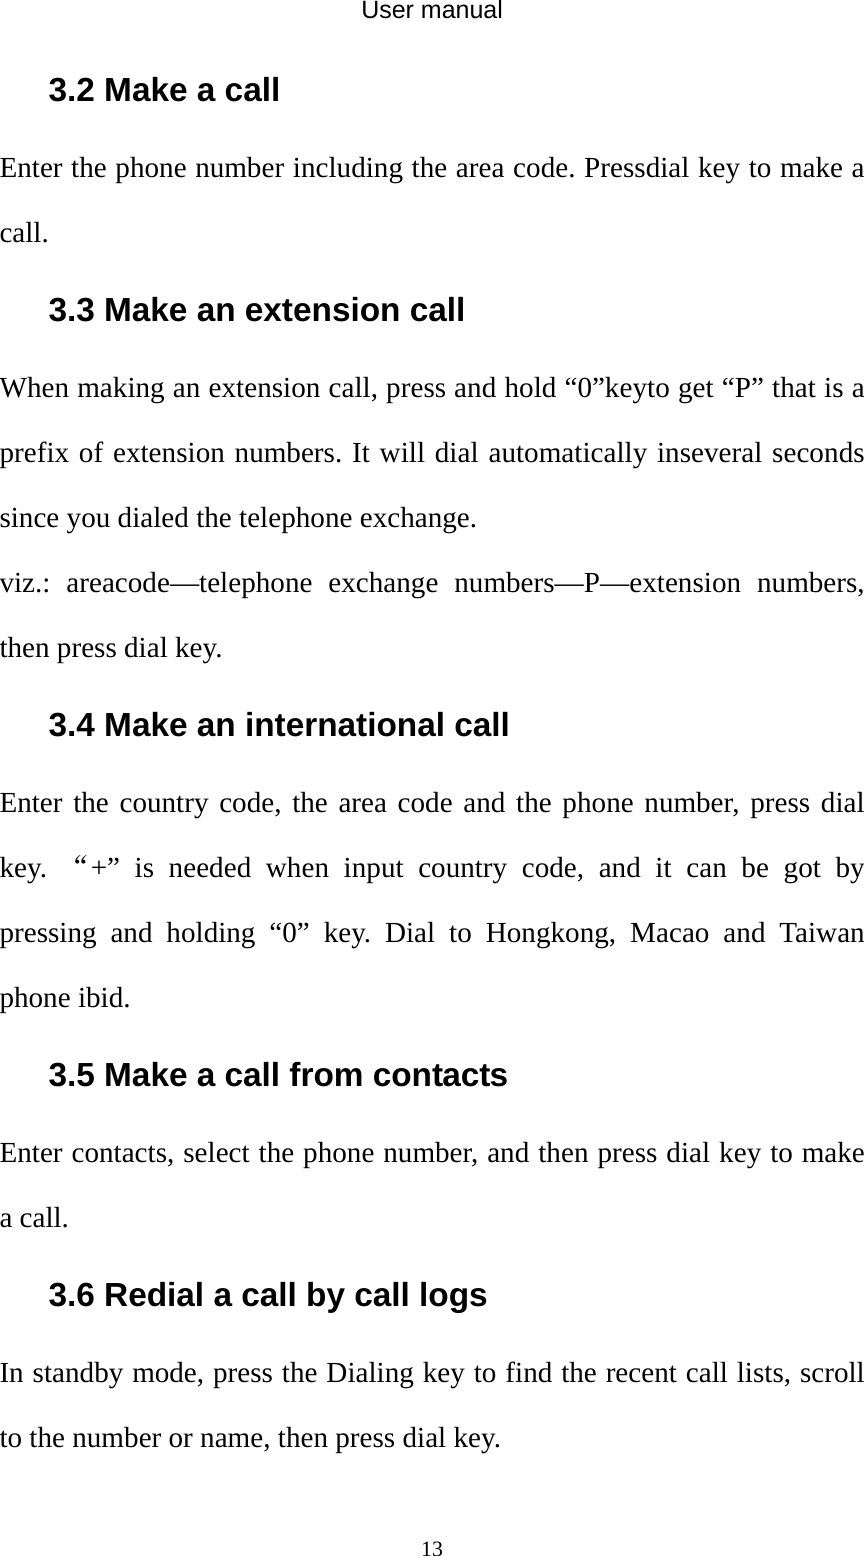 User manual  133.2 Make a call Enter the phone number including the area code. Pressdial key to make a call.  3.3 Make an extension call When making an extension call, press and hold “0”keyto get “P” that is a prefix of extension numbers. It will dial automatically inseveral seconds since you dialed the telephone exchange.   viz.: areacode—telephone exchange numbers—P—extension numbers, then press dial key. 3.4 Make an international call Enter the country code, the area code and the phone number, press dial key.  “+” is needed when input country code, and it can be got by pressing and holding “0” key. Dial to Hongkong, Macao and Taiwan phone ibid. 3.5 Make a call from contacts Enter contacts, select the phone number, and then press dial key to make a call. 3.6 Redial a call by call logs In standby mode, press the Dialing key to find the recent call lists, scroll to the number or name, then press dial key. 